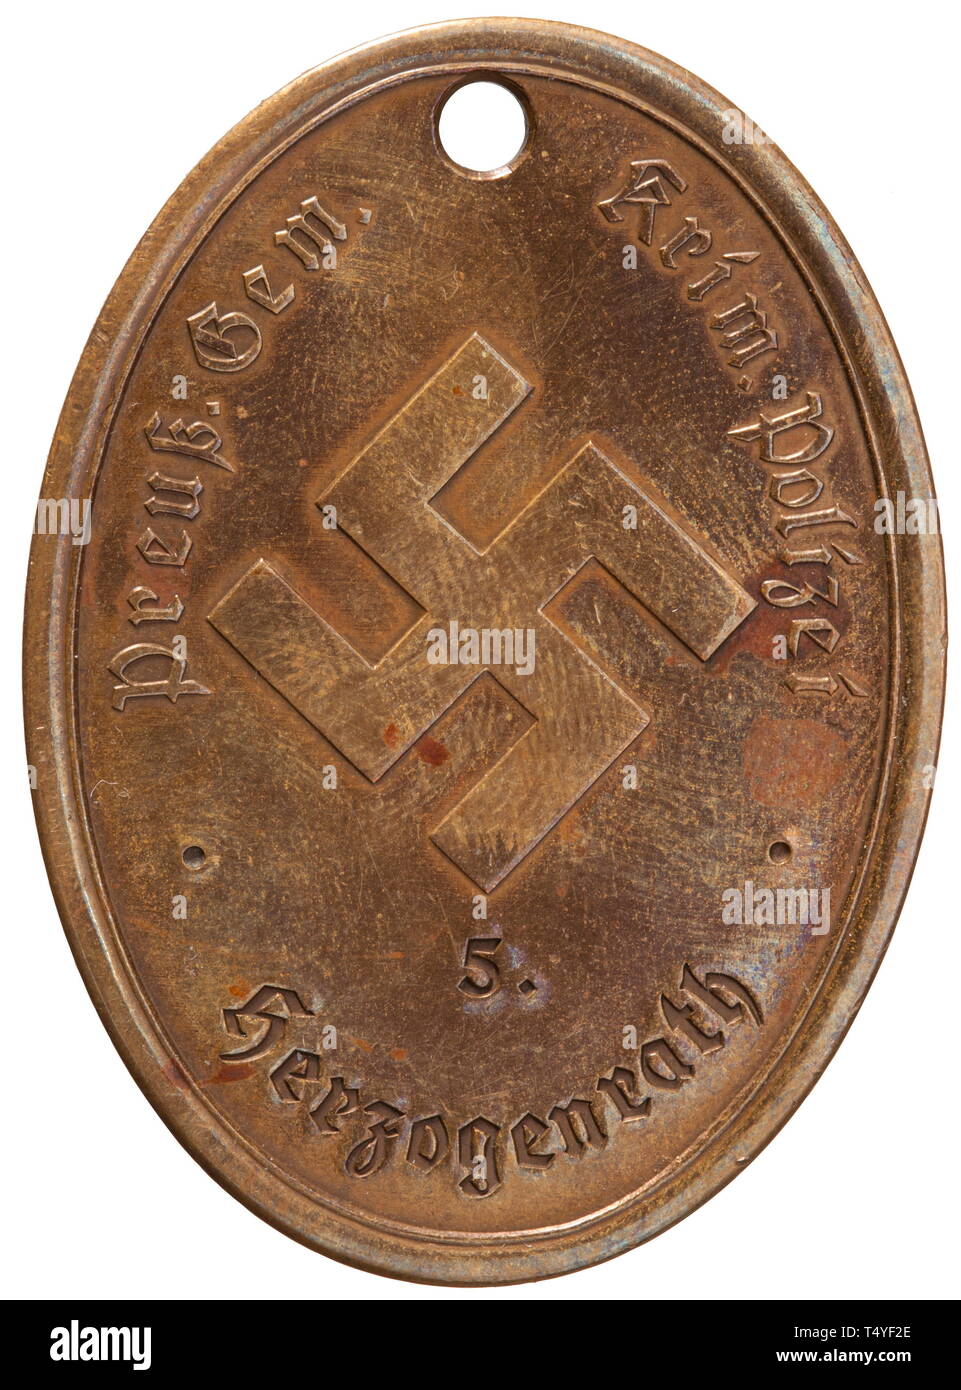 An identity disc of the Prussian communal criminal police of Herzogenrath. Bronze, the obverse with a stamped Prussian eagle and national emblem surmounted by the motto 'Gott mit uns'. The reverse with raised characters 'Preuß. Gem. Krim. Polizei' beneath which is struck 'Herzogenrath' surmounted by a struck '5.' flanked by delimiting points, the centre with a raised swastika. Dimensions 37 x 51 mm, weight 29.7 g. A very rare badge. historic, historical, 20th century, Additional-Rights-Clearance-Info-Not-Available Stock Photo